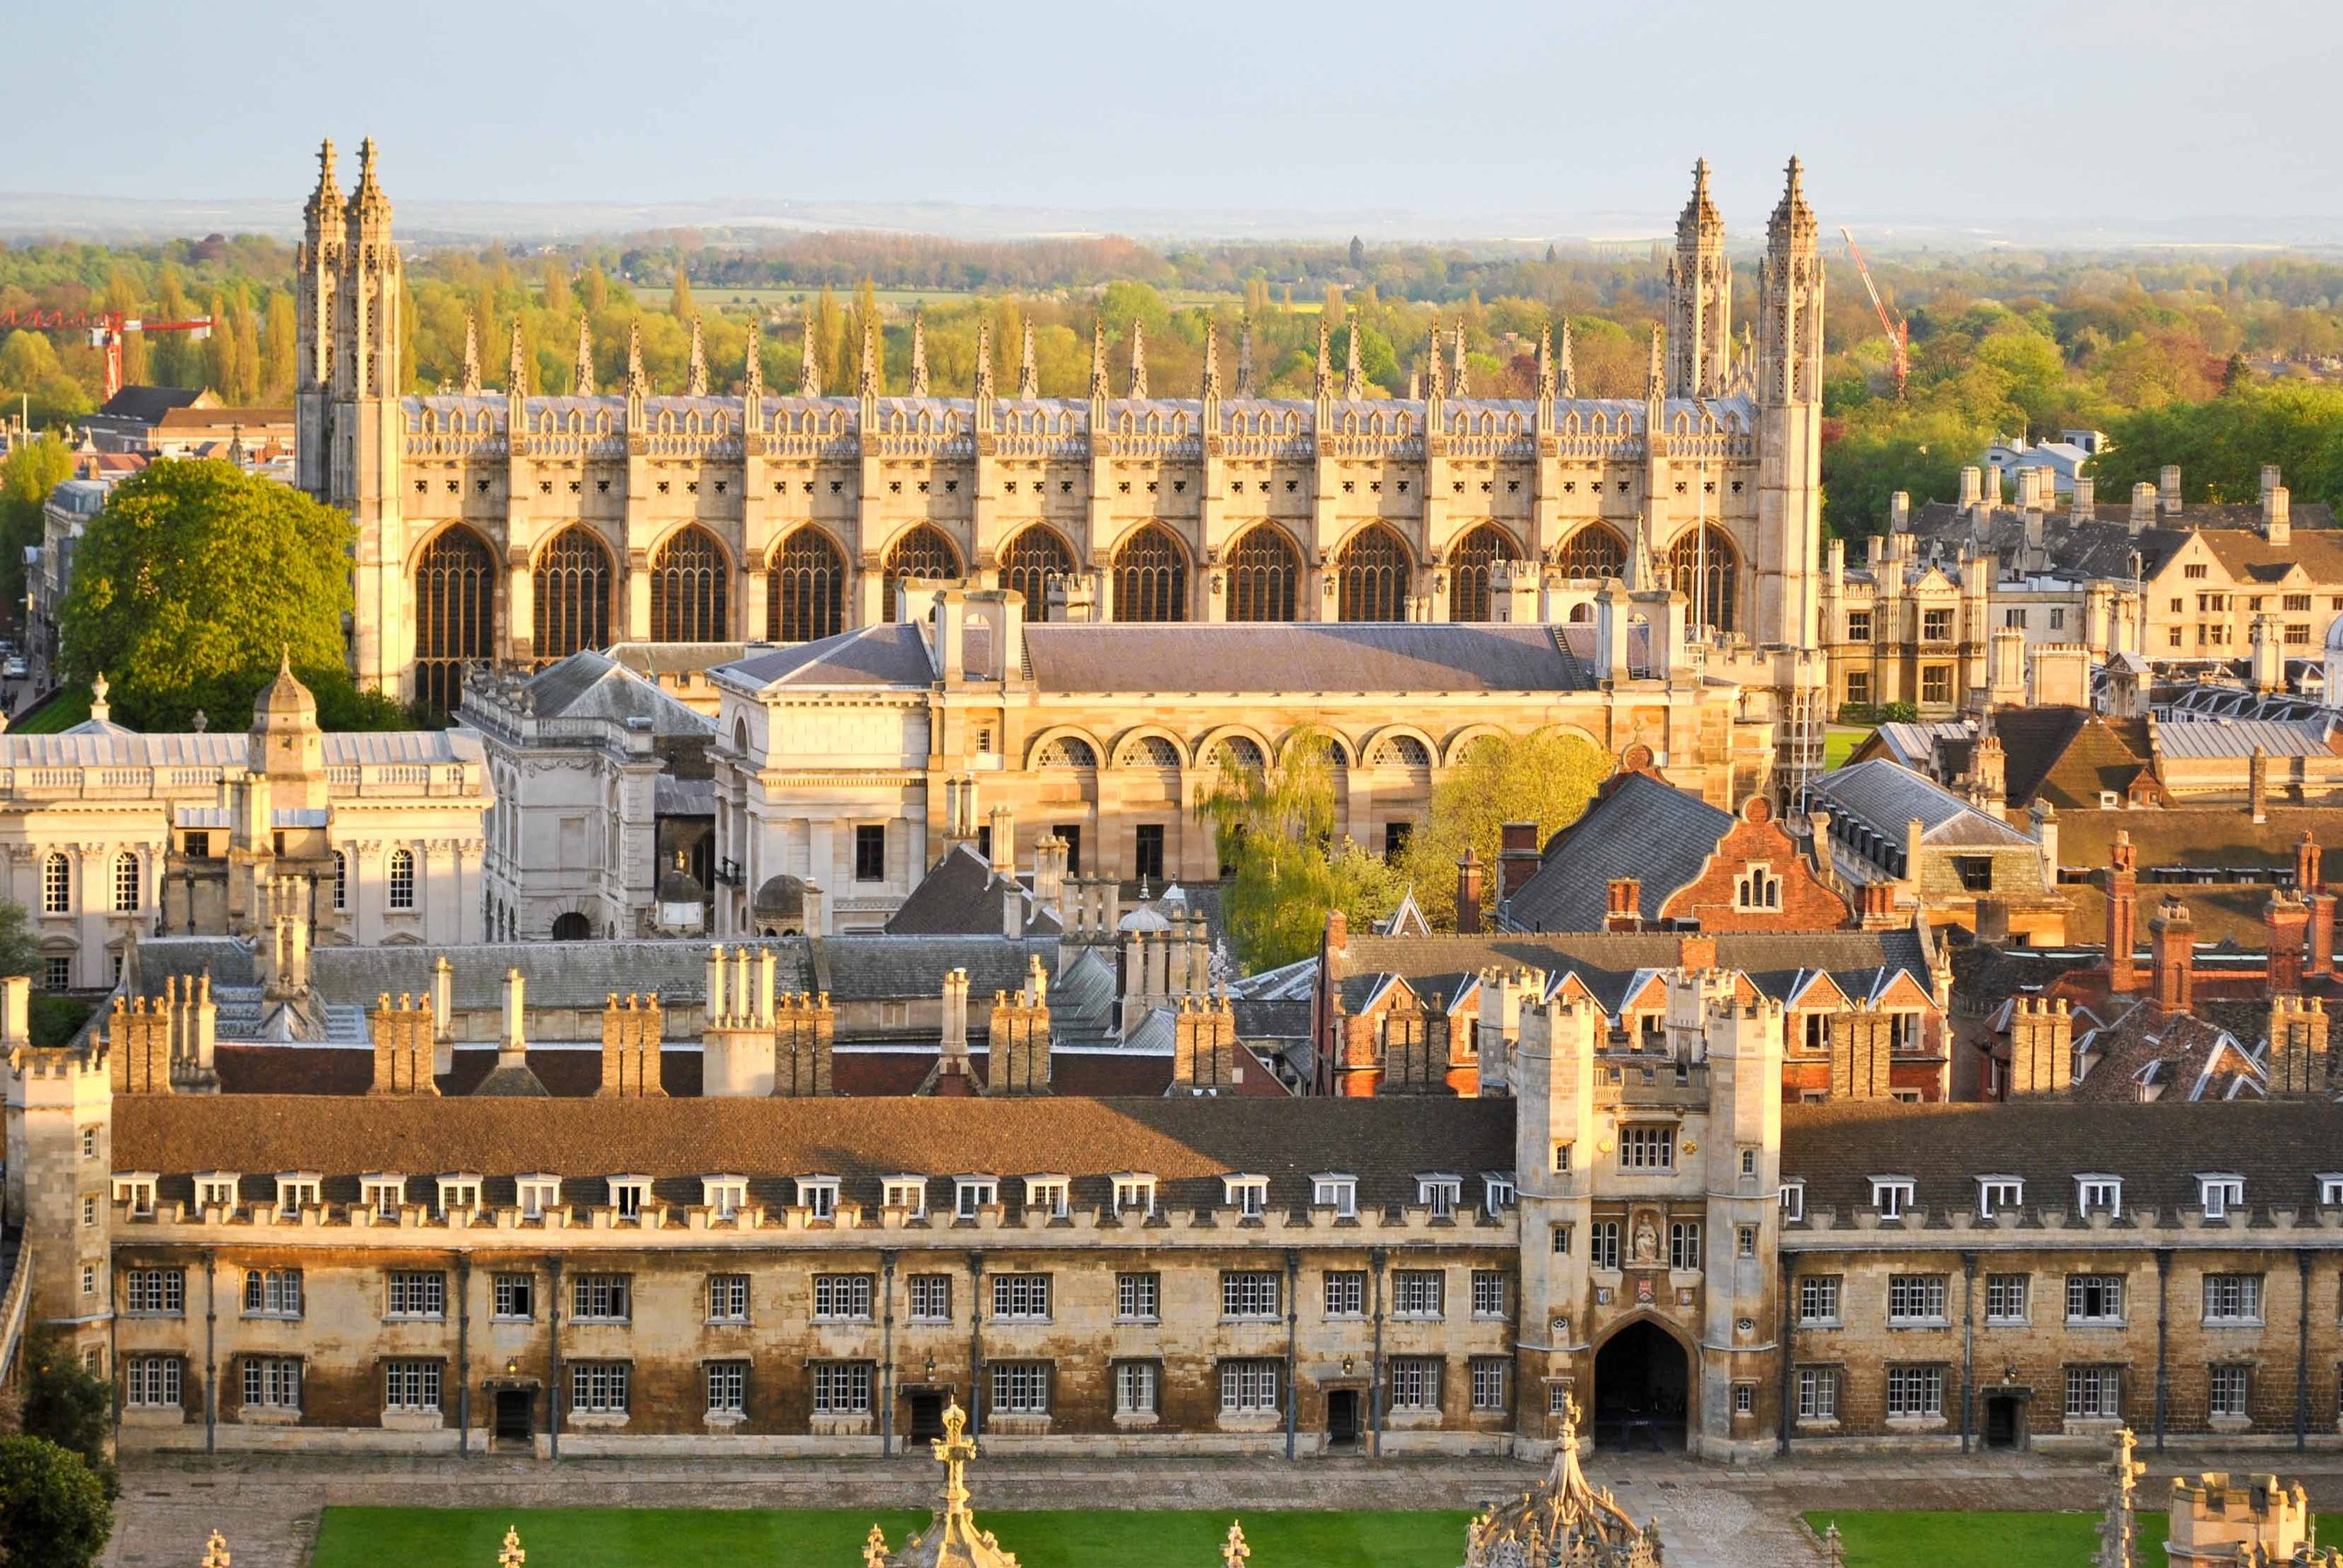 An aerial view of King's College Chapel at the University of Cambridge